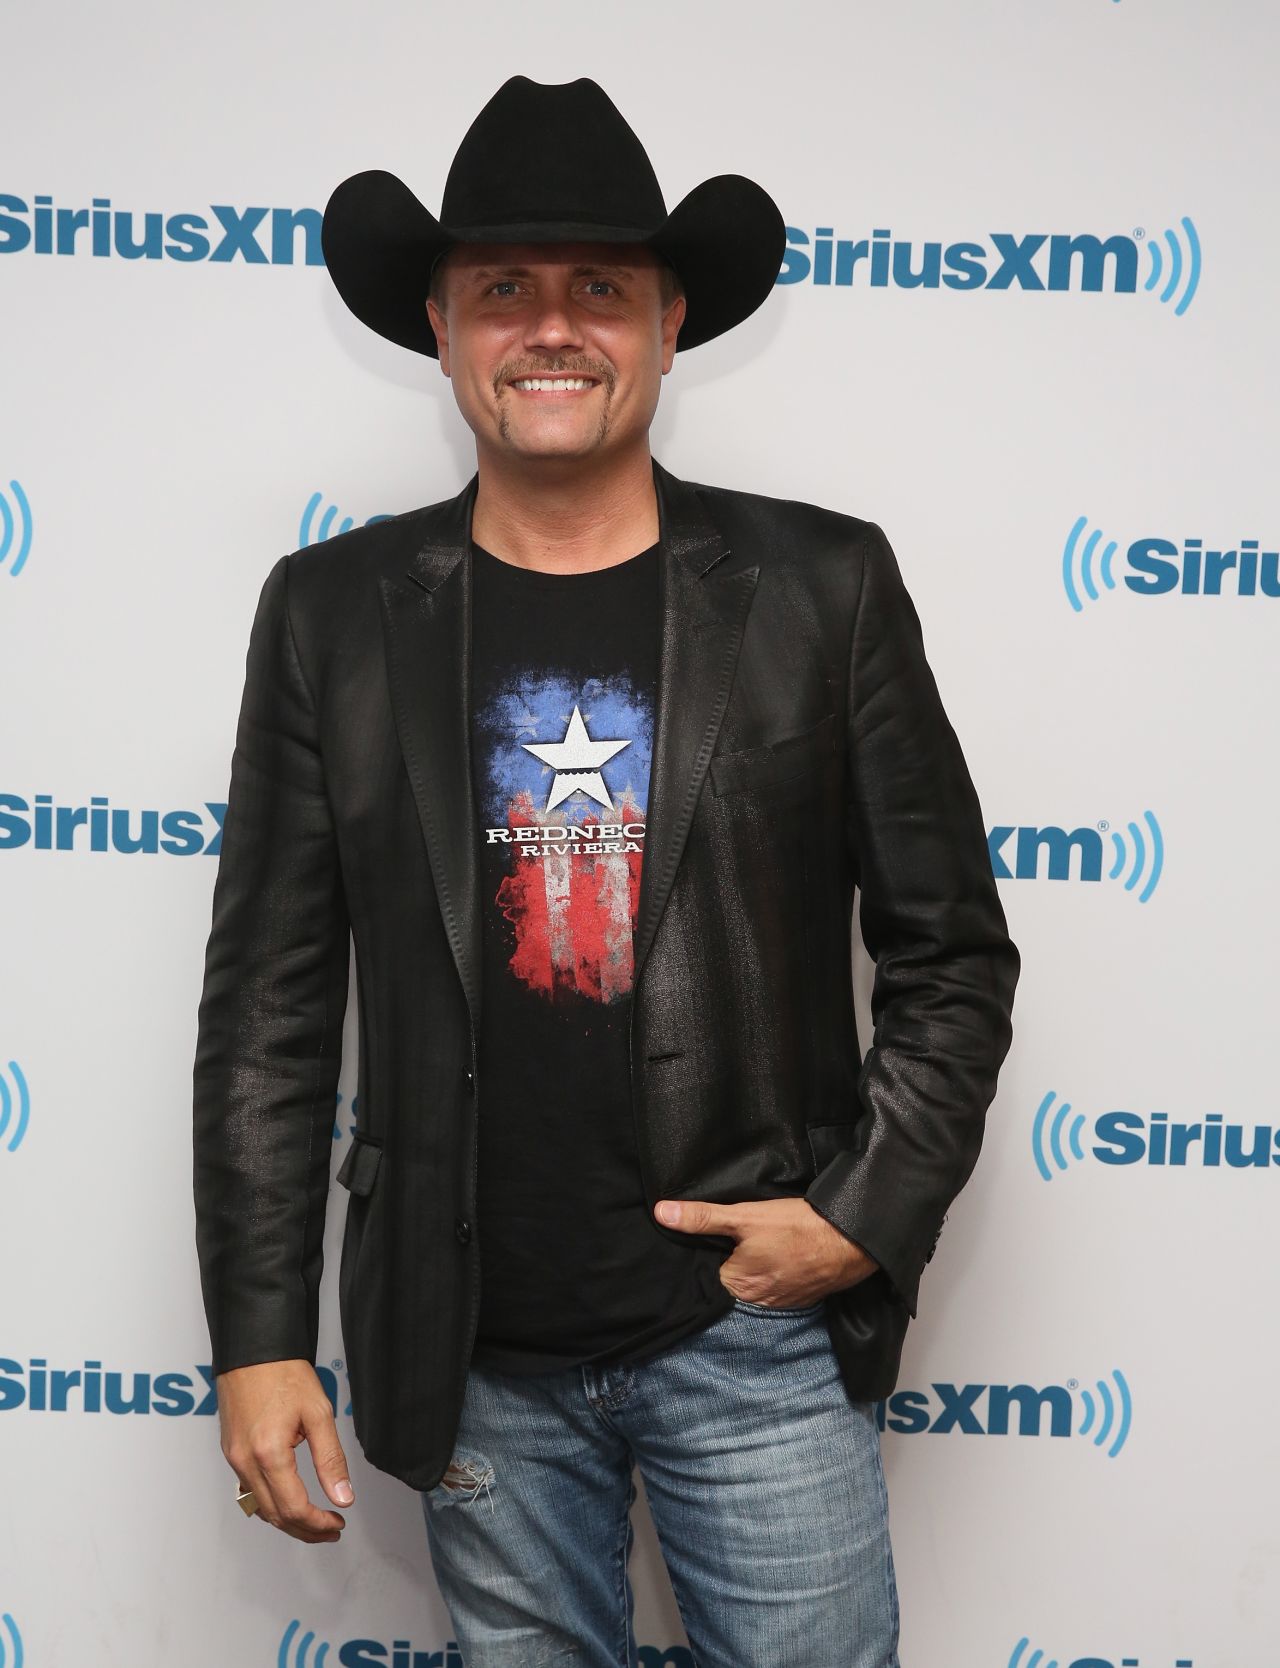 Country star John Rich won season 6 of "Celebrity Apprentice" and interestingly enough has also been linked to the current campaign: Aspiring candidate Rand Paul had his presidential announcement video <a href="http://www.billboard.com/articles/business/6524377/rand-paul-presidential-announcement-video-pulled-youtube-content-id?utm_source=Sailthru&utm_medium=email&utm_term=biz_breakingnews&utm_campaign=Breaking%20News" target="_blank" target="_blank">pulled from YouTube for unlicensed use of Rich's song "Shuttin' Down Detroit." </a>